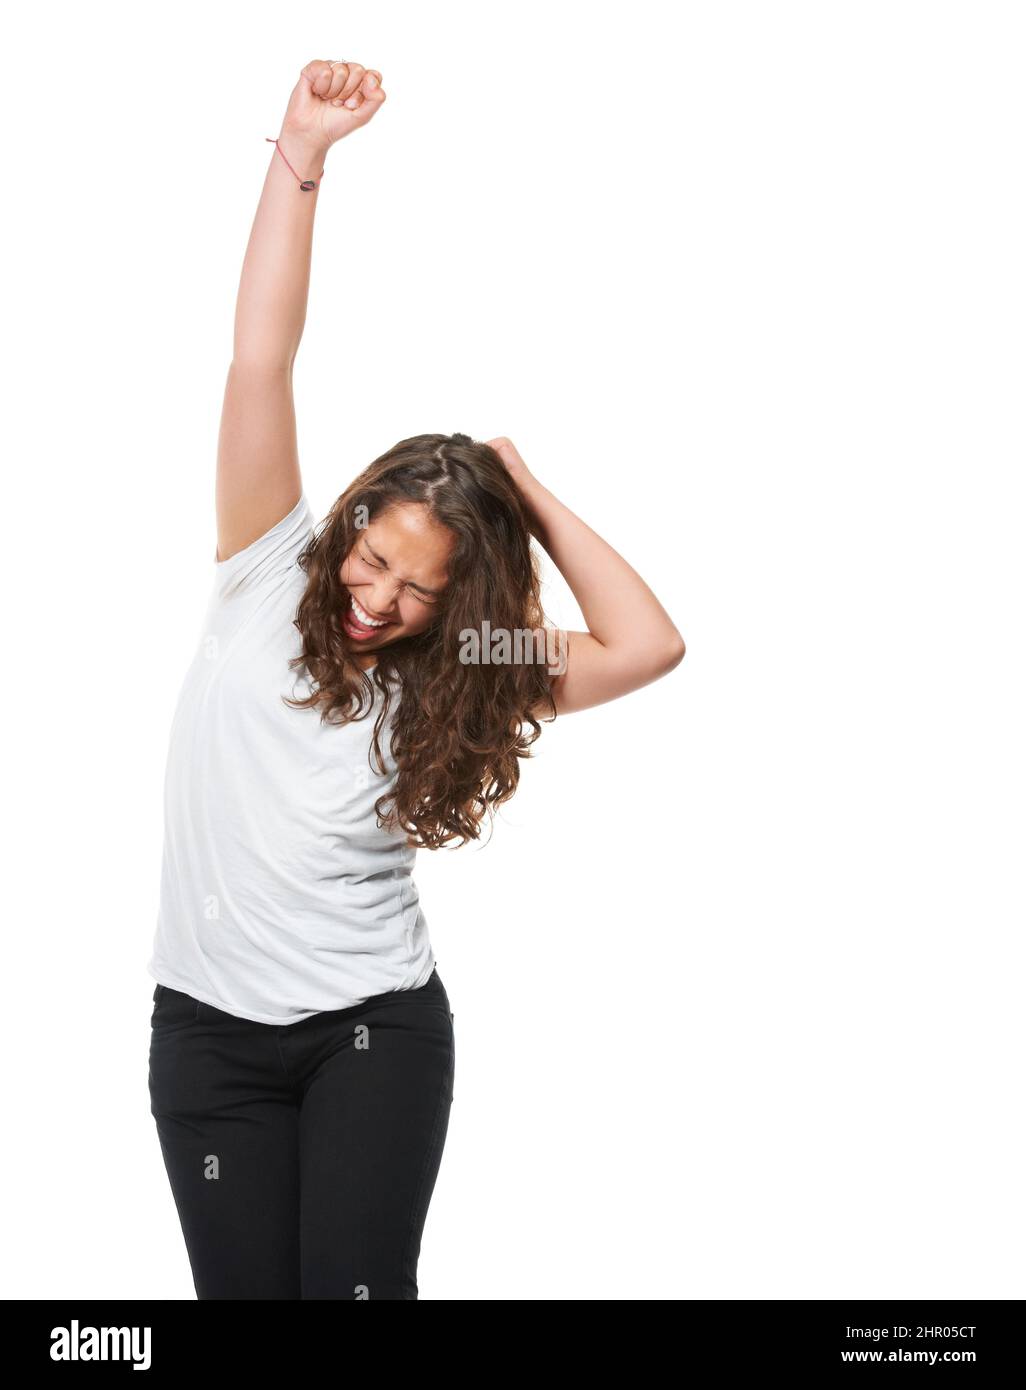 Shes positively casual. Studio shot of an all-natural woman isolated on white. Stock Photo